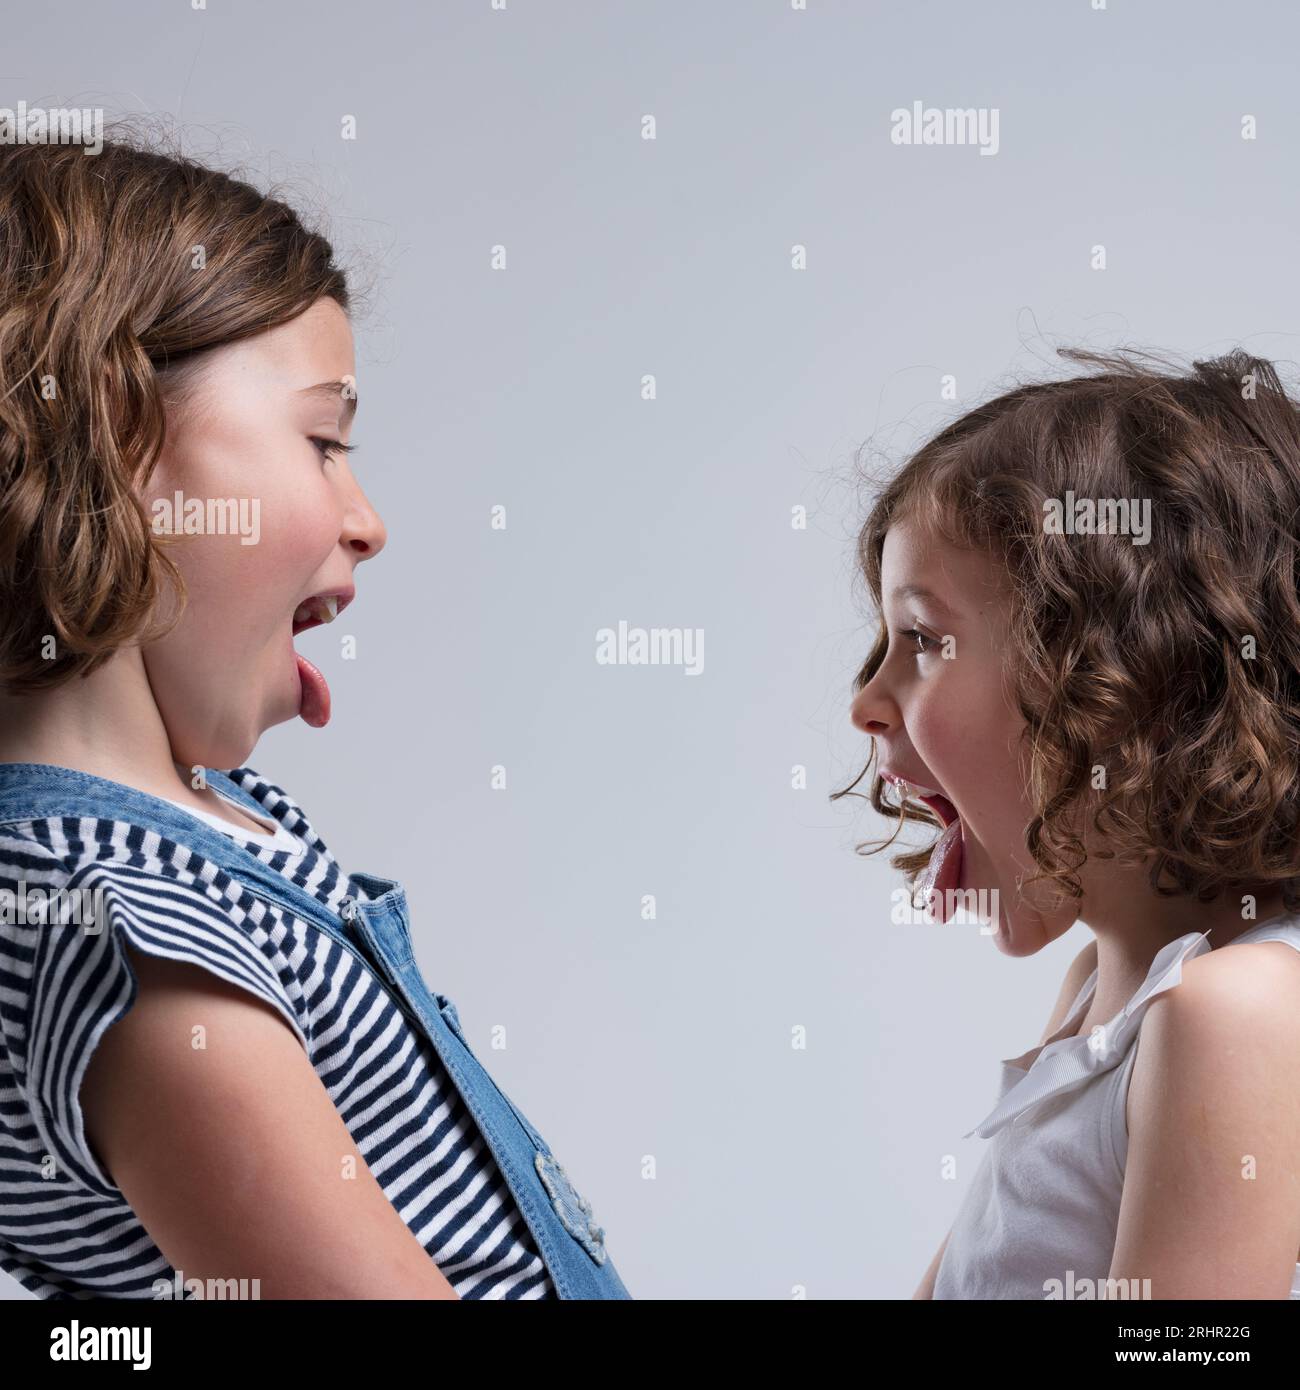 Young girls, possibly sisters or friends, teasing and making faces. Pictured side-by-side in casual attire, radiating happiness and laughter Stock Photo